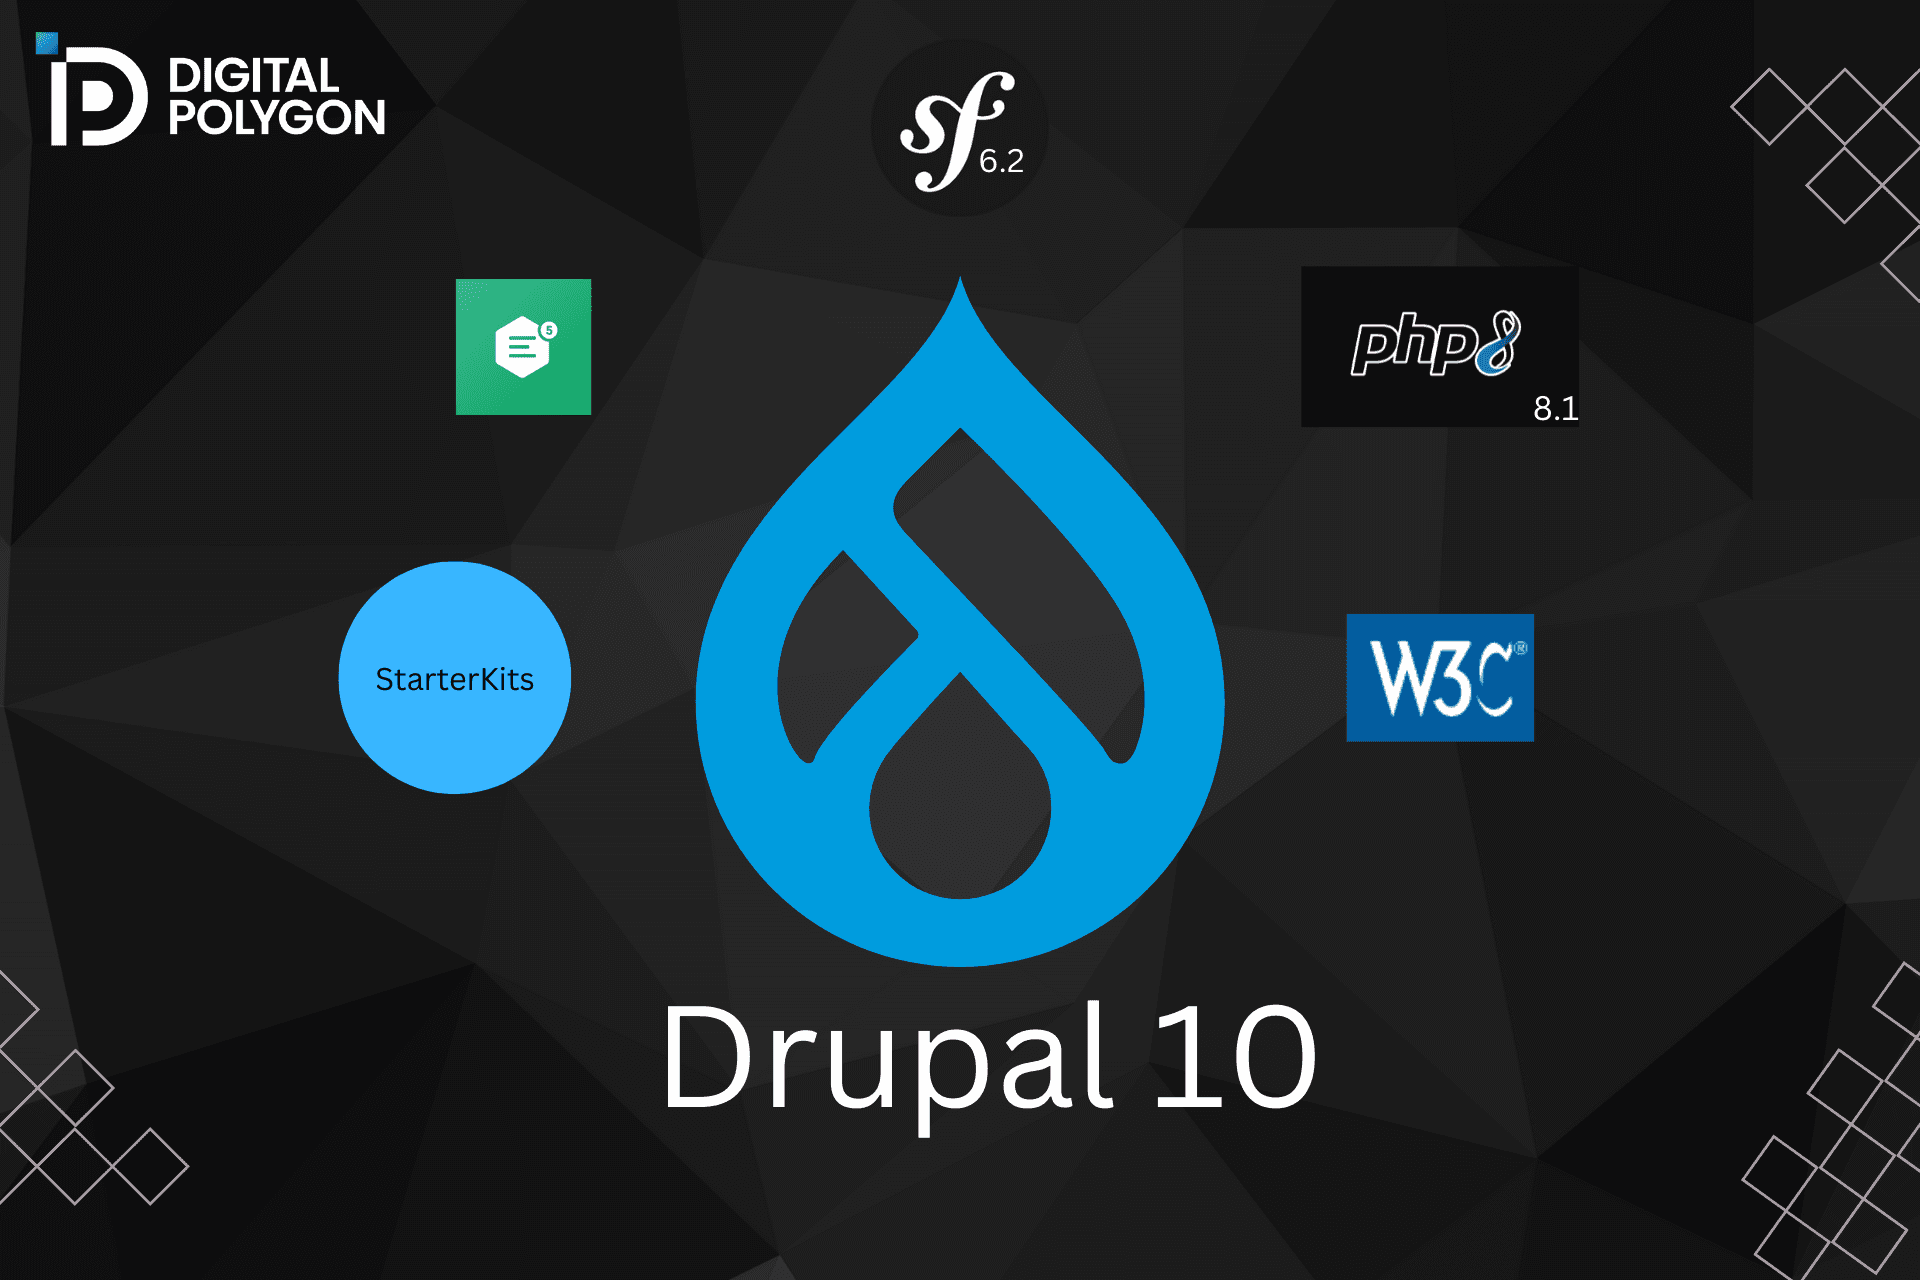 Whats New in Drupal 10 - An Overview